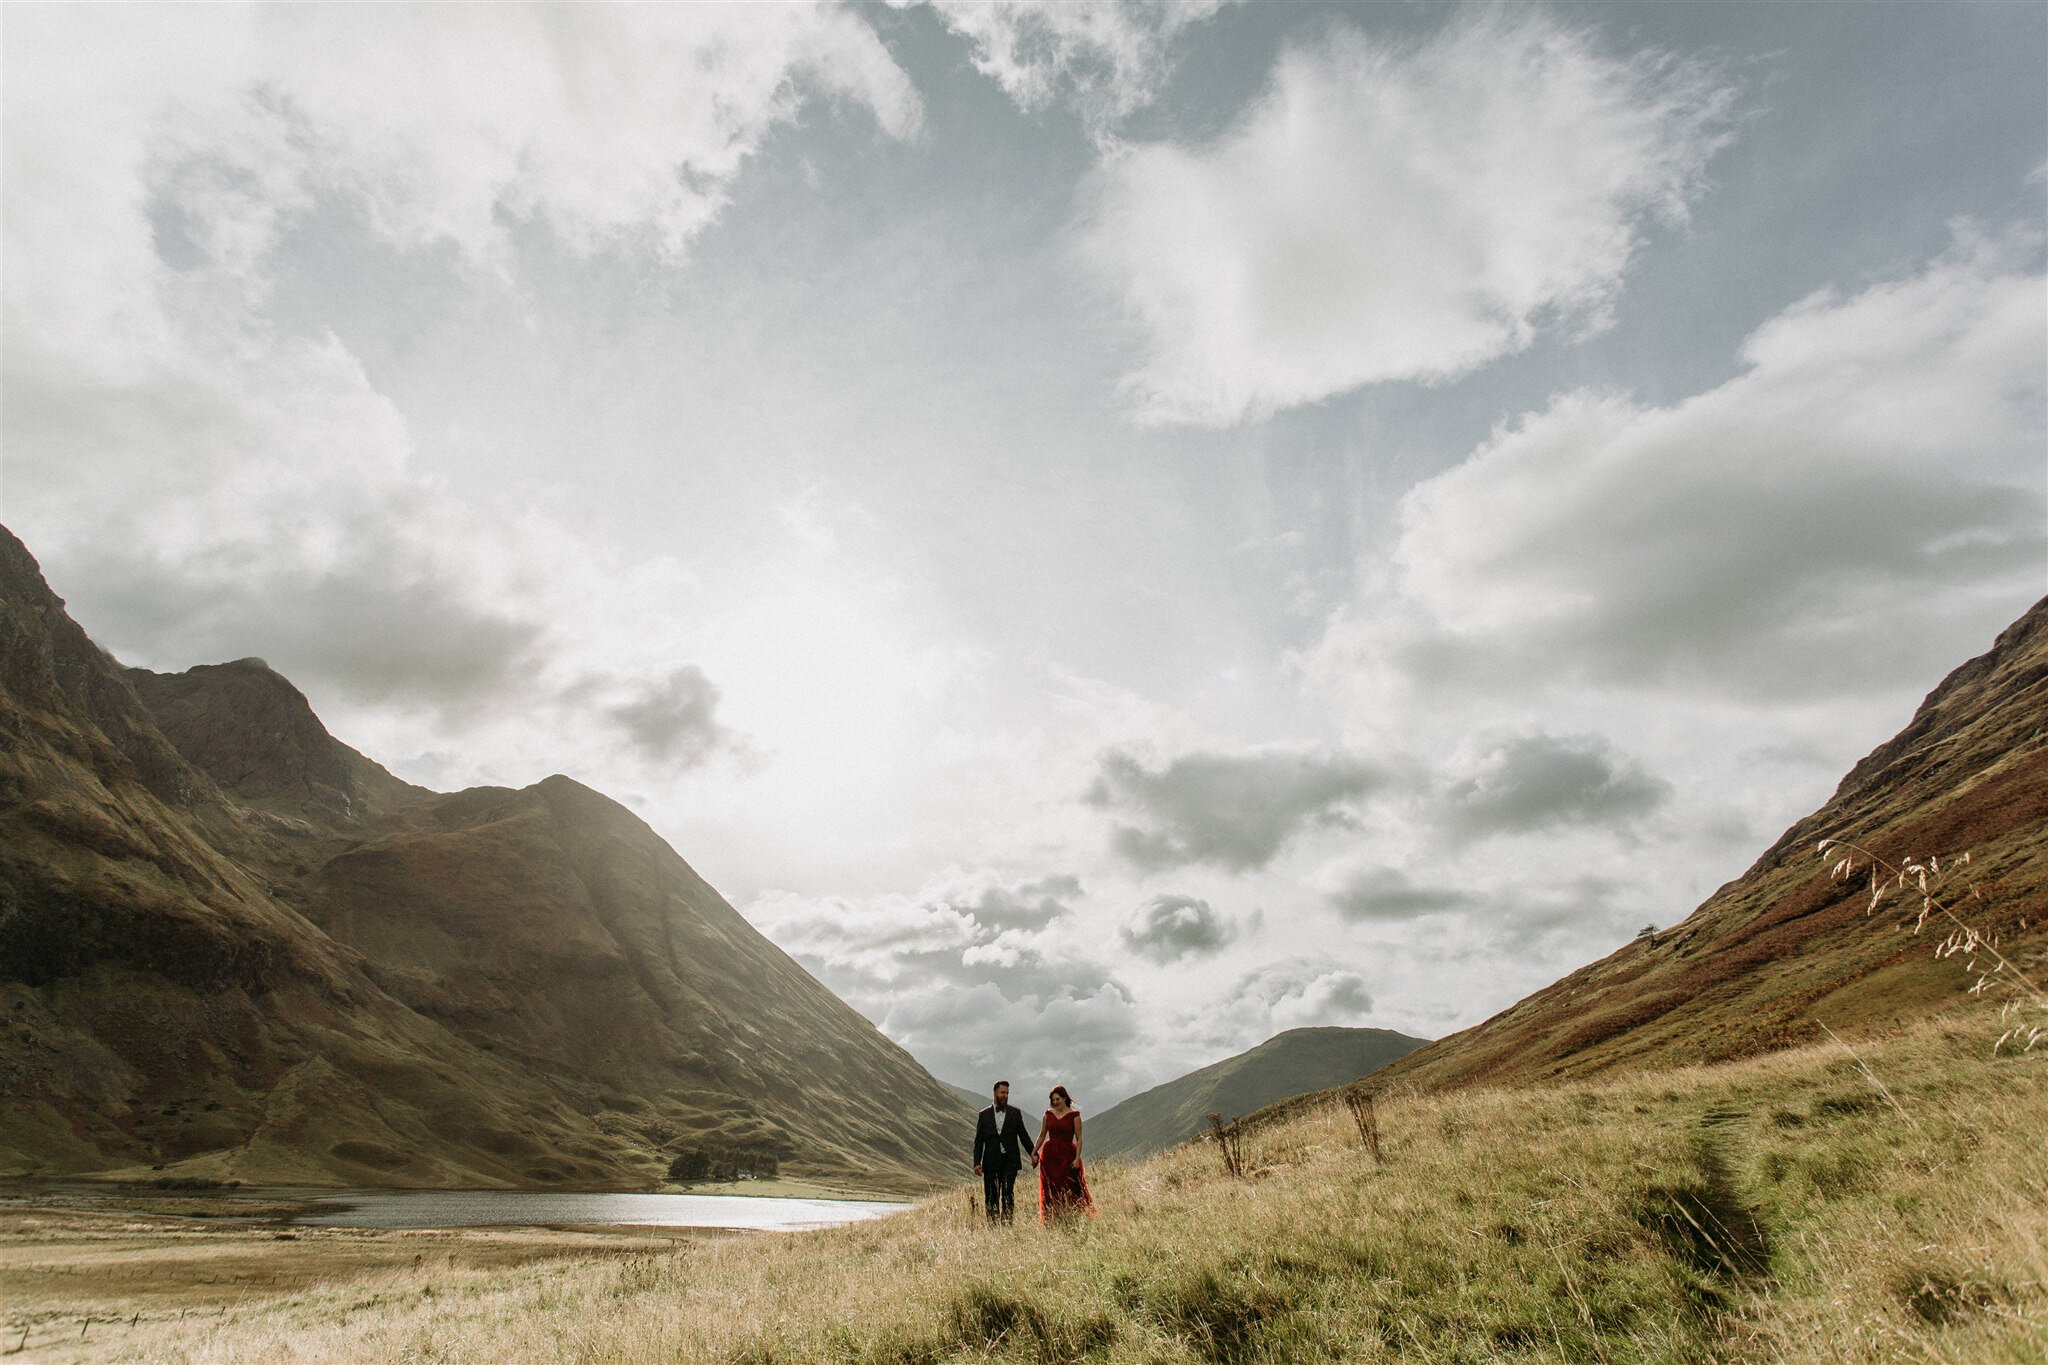 Glen Coe Scotland elopement. Bride in red dress and her groom standing side by side in a field in the Scottish Highlands | Adventure elopement photographer